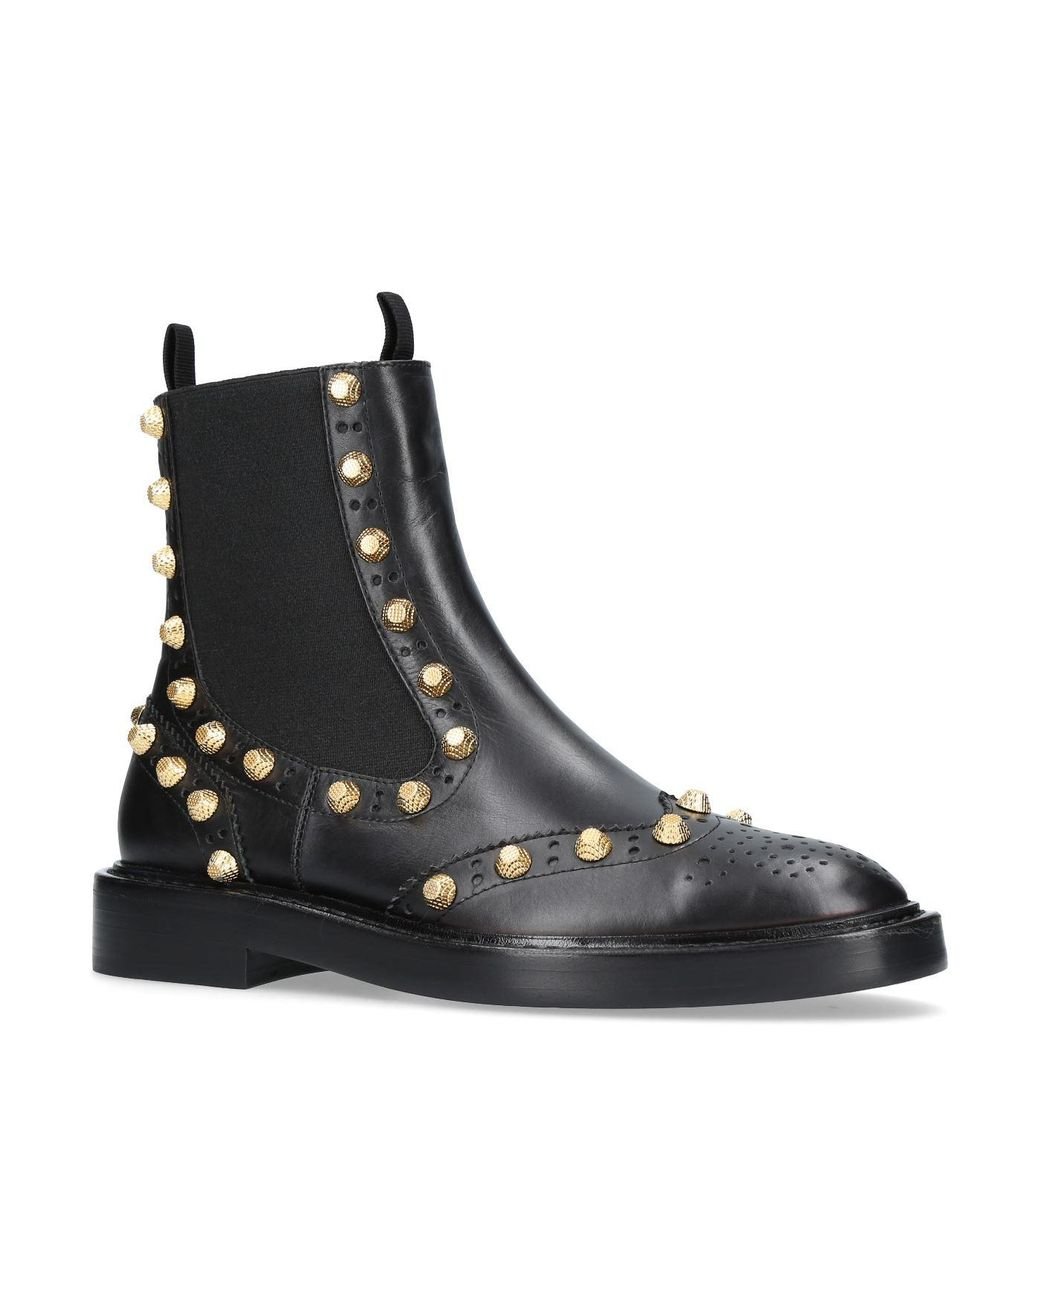 STUDDED ANKLE BOOTS - Black